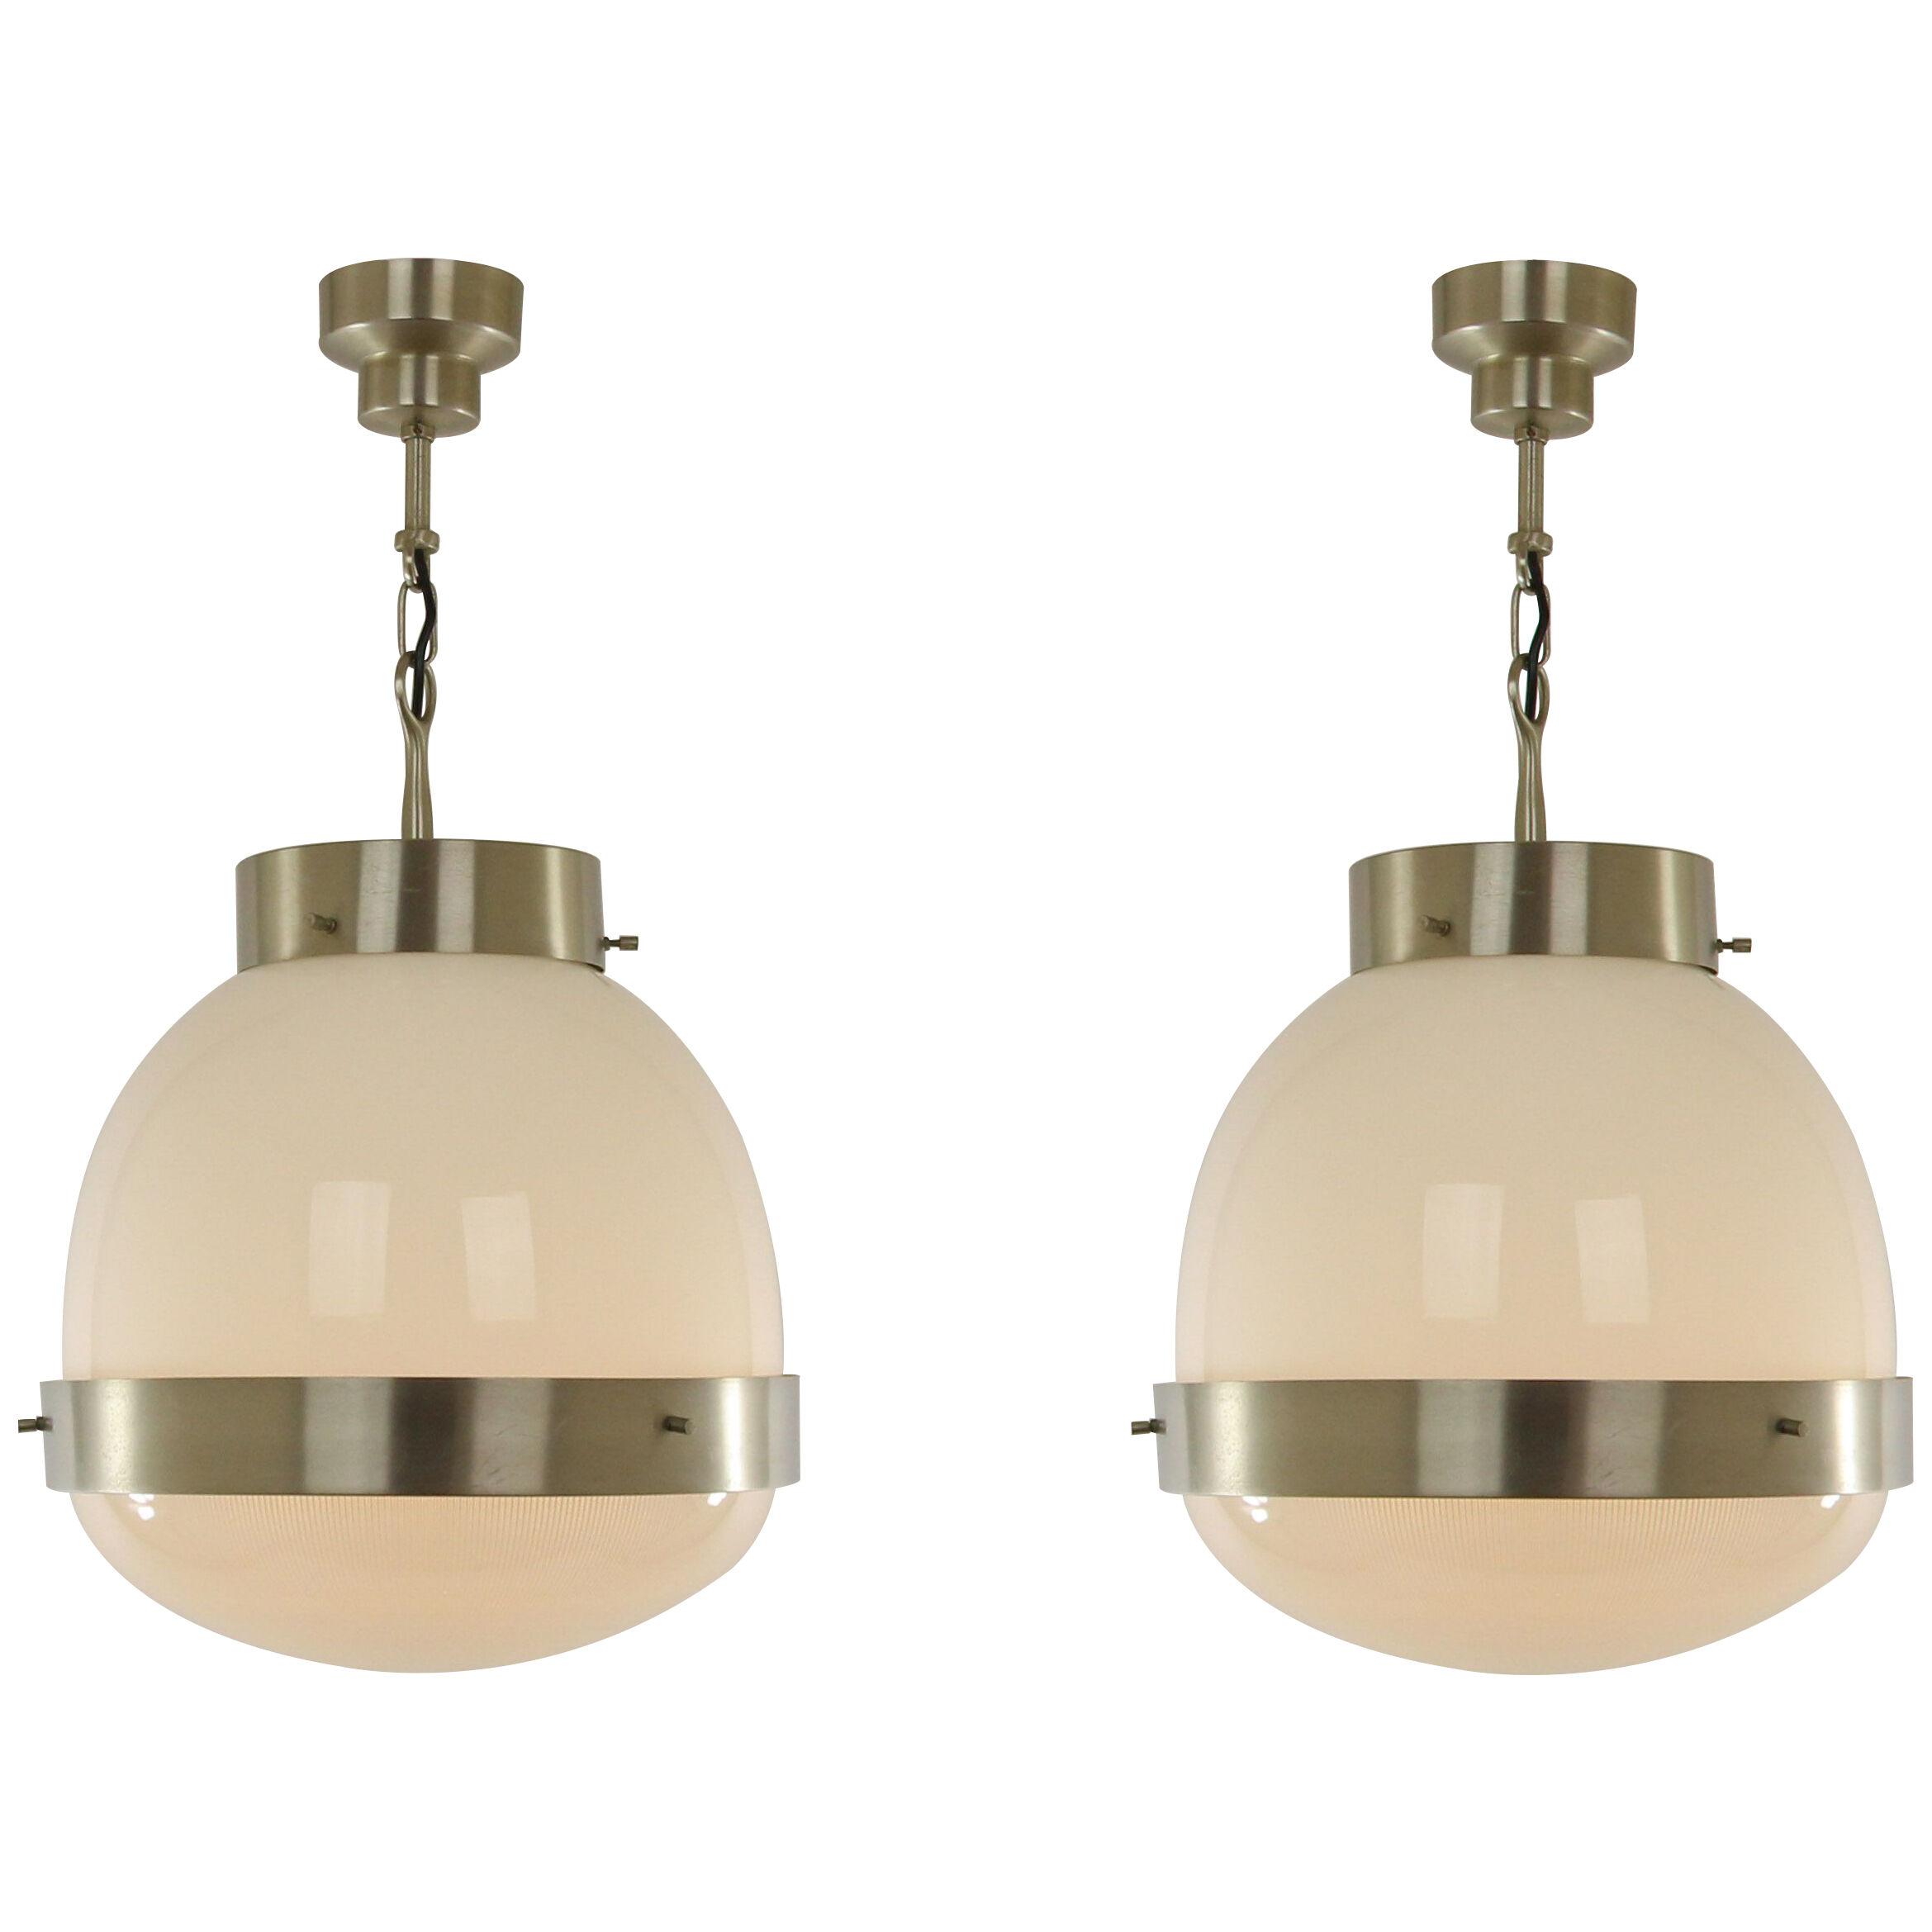 Pair of large Delta pendants by Sergio Mazza for Artemide, 1960s